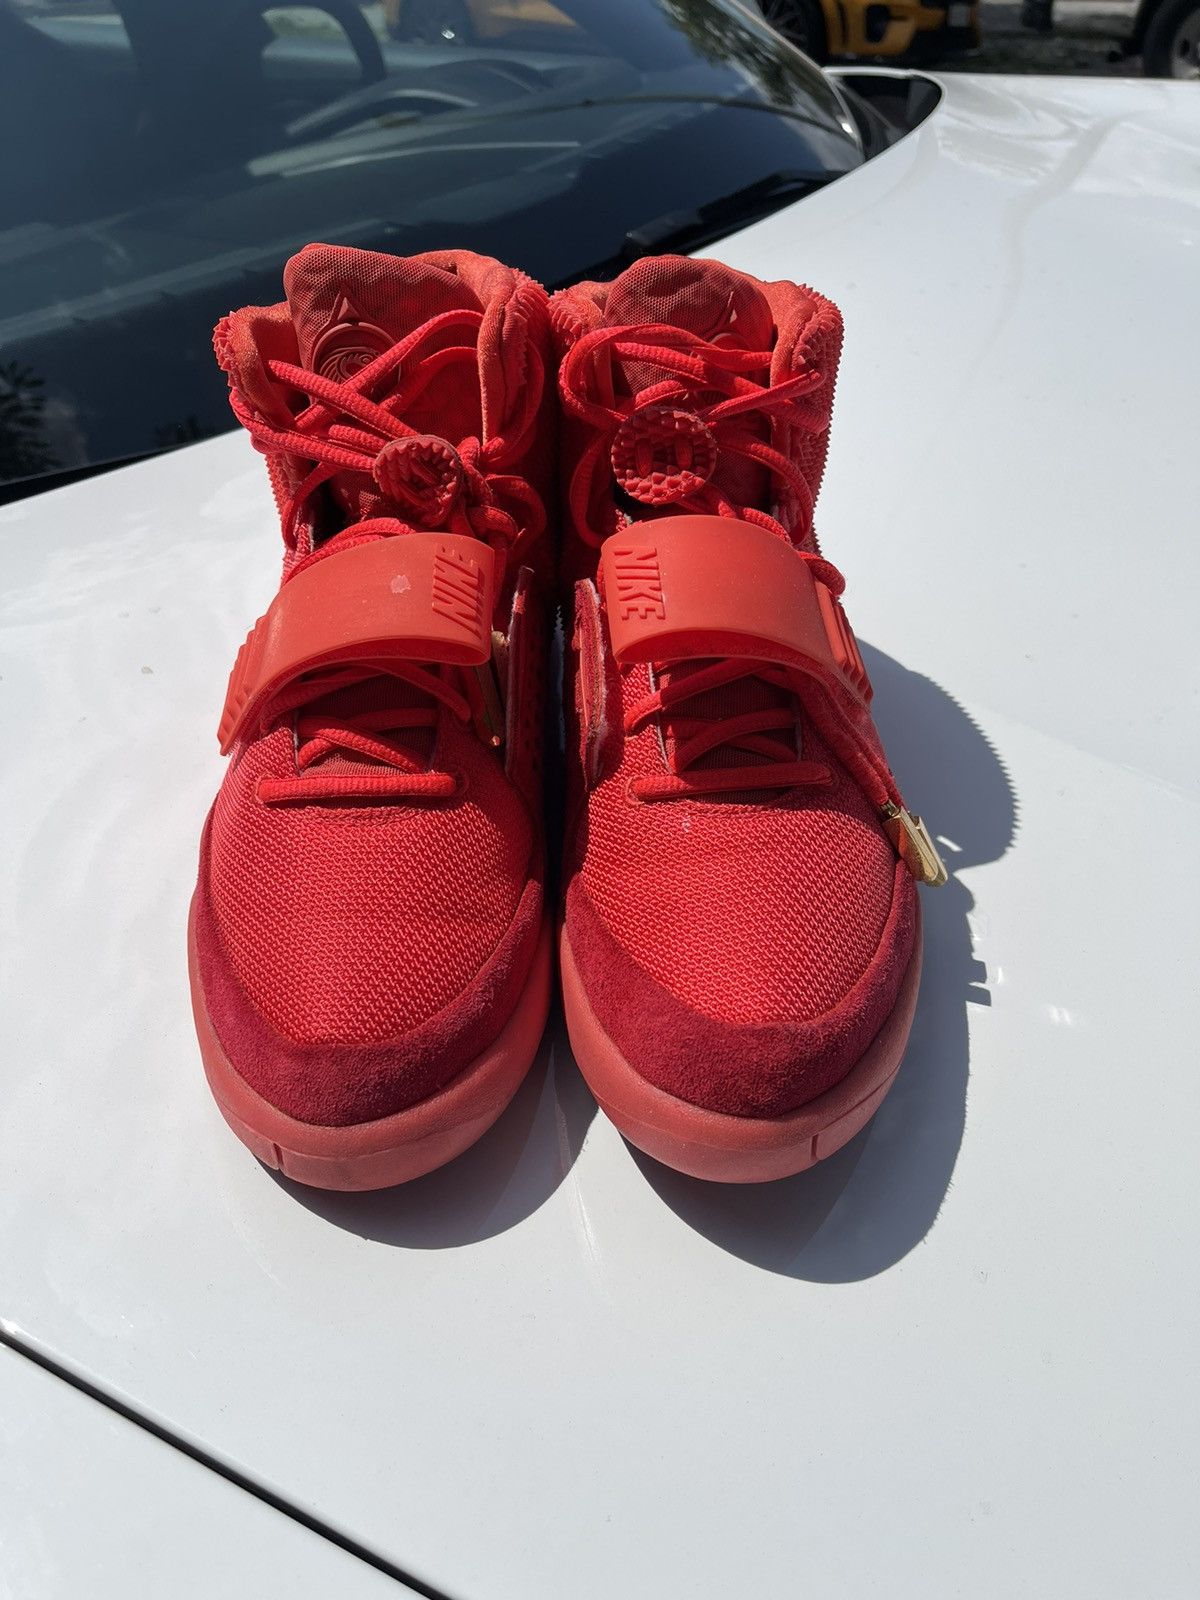 West X Nike Yeezy 2 Red October Shoes | ModeSens